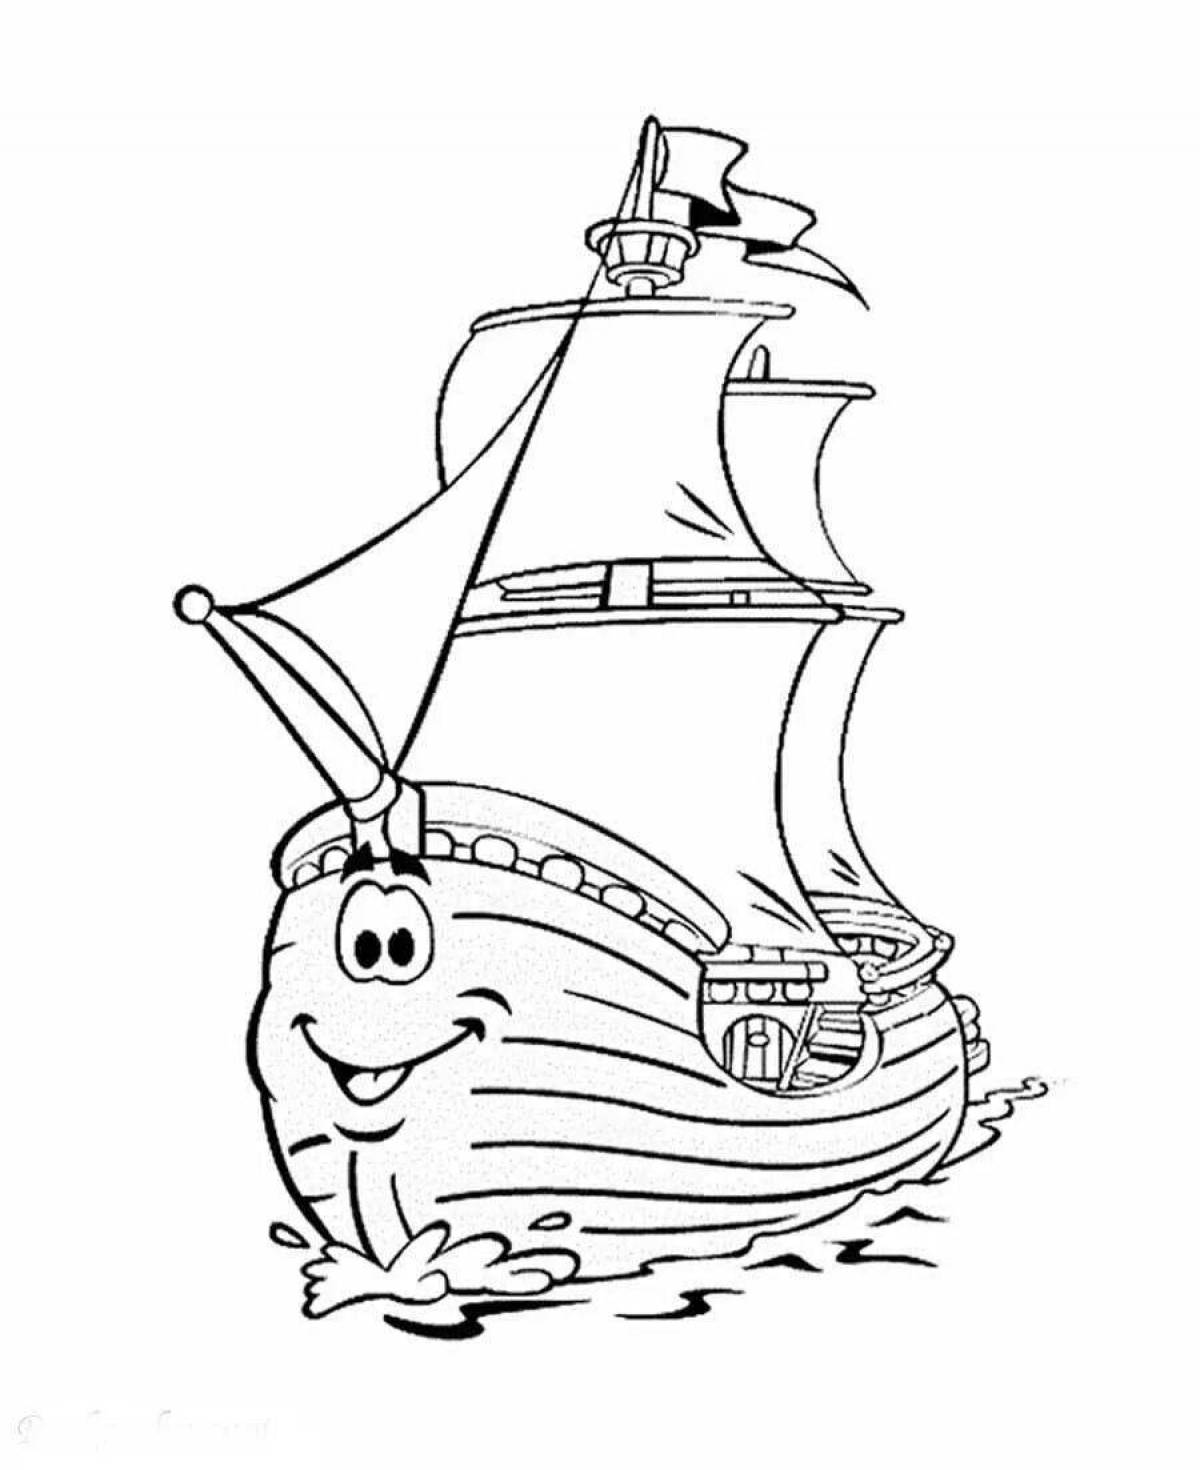 Amazing sailboat coloring page for beginners